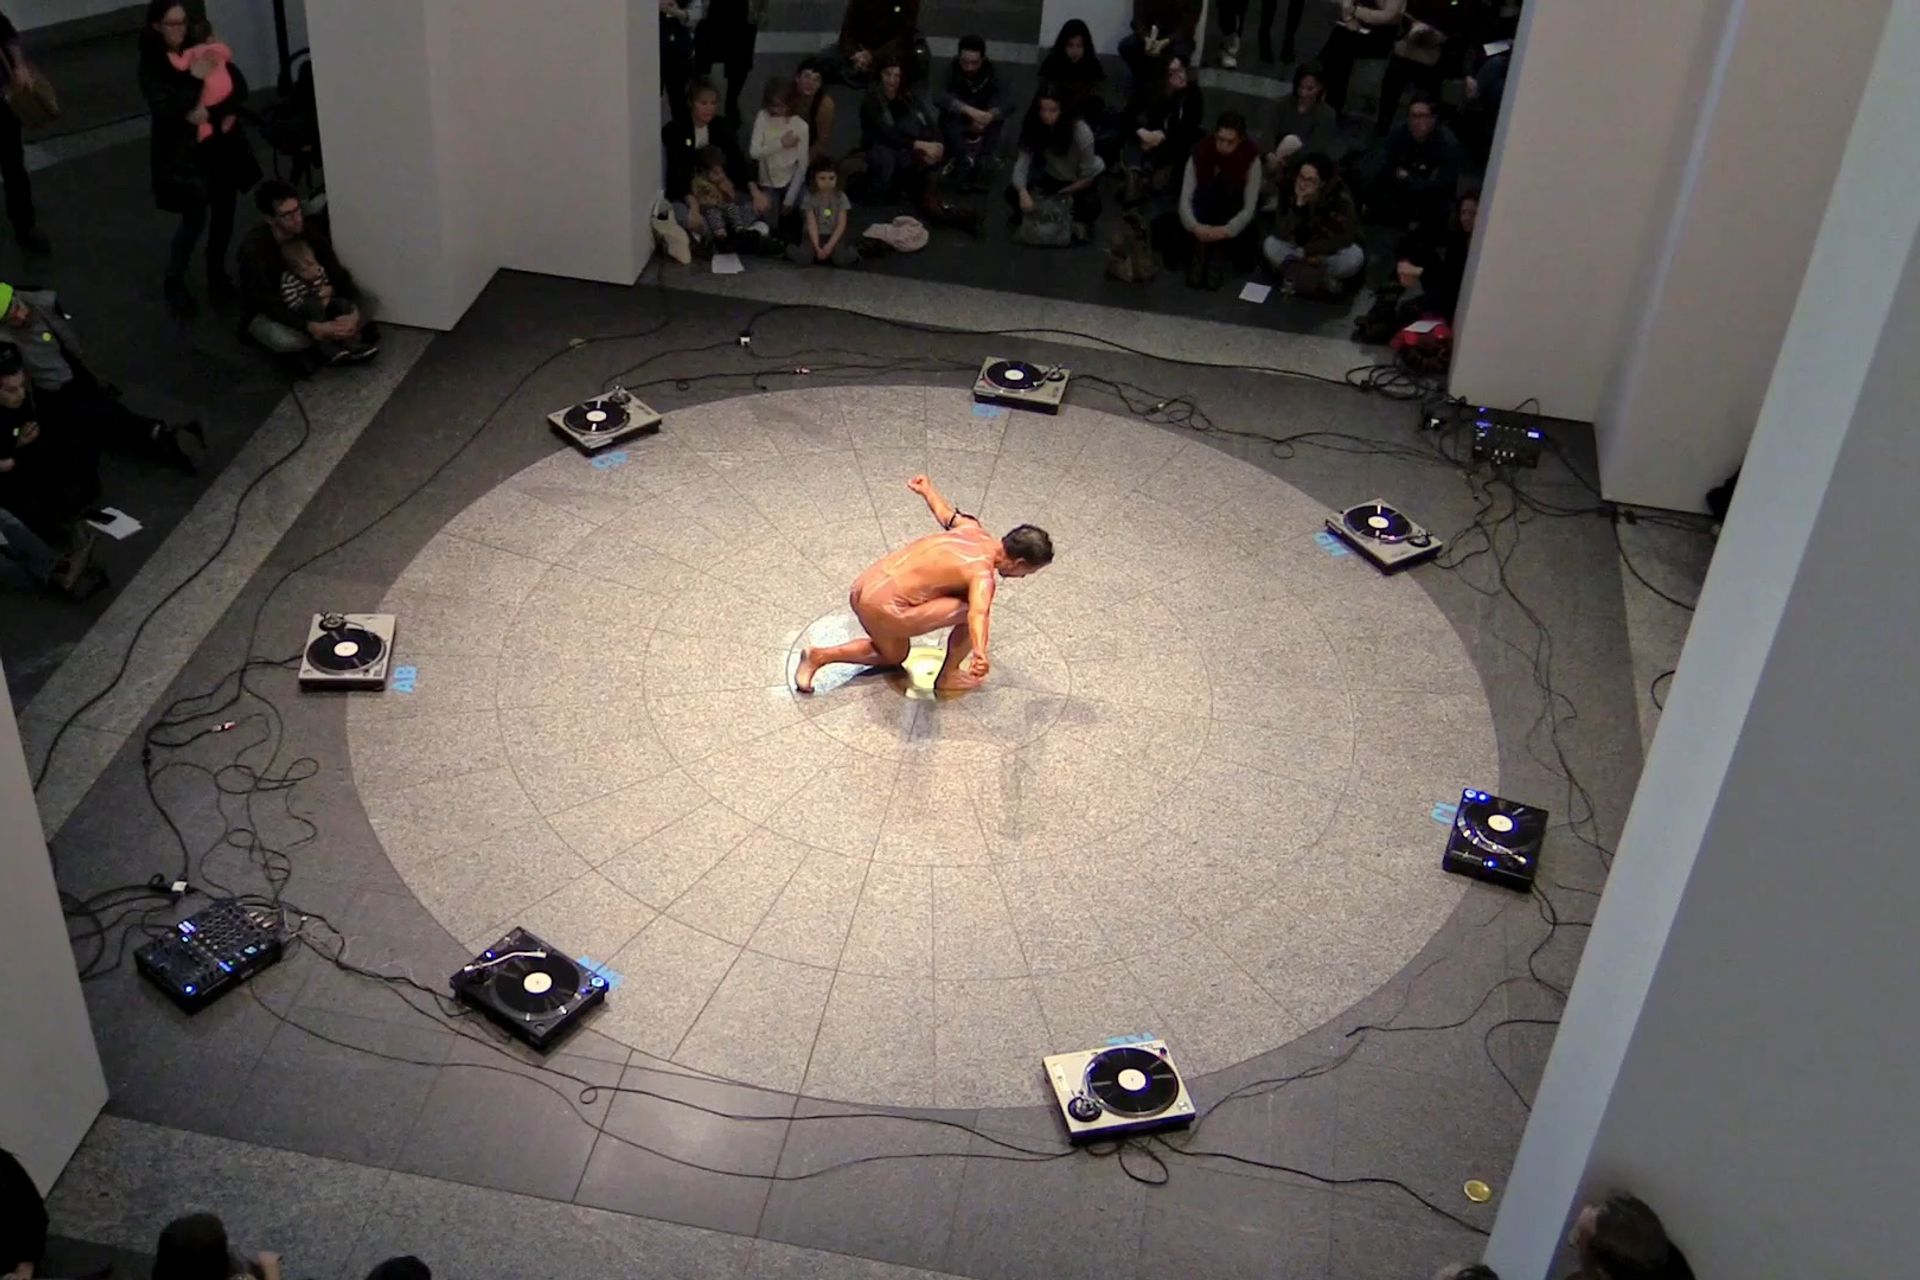 Video still of female bodybuilder performing PPKK 04.01 by Sarah Ancelle Schoenfeld and Louis-Philippe Scoufaras at MAC Montreal